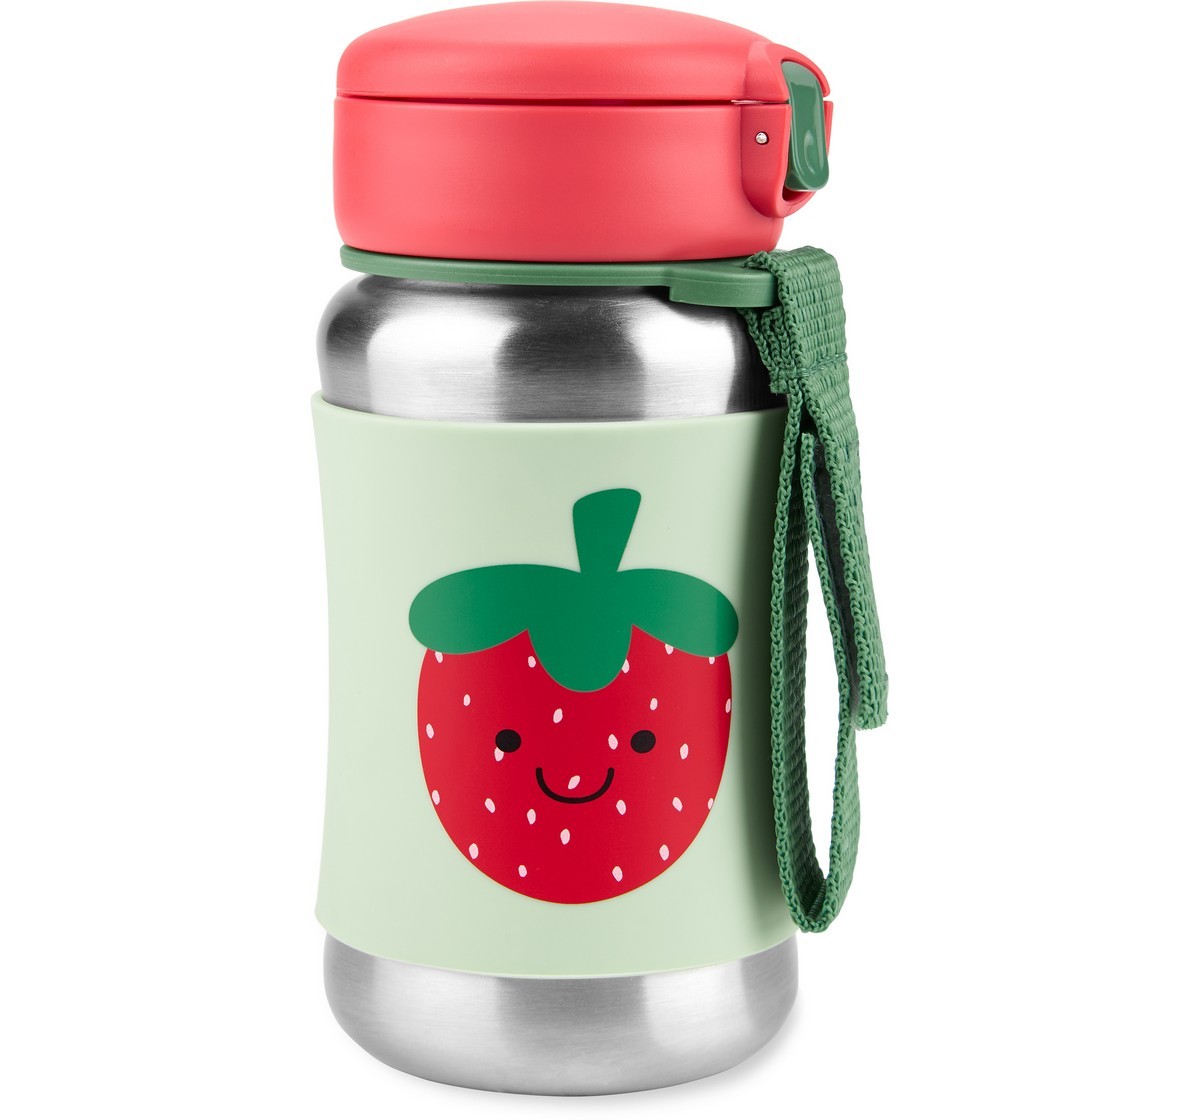 Skip Hop Spark Style Stainless Steel Bottle Strawberry 3Y+, Multicolour